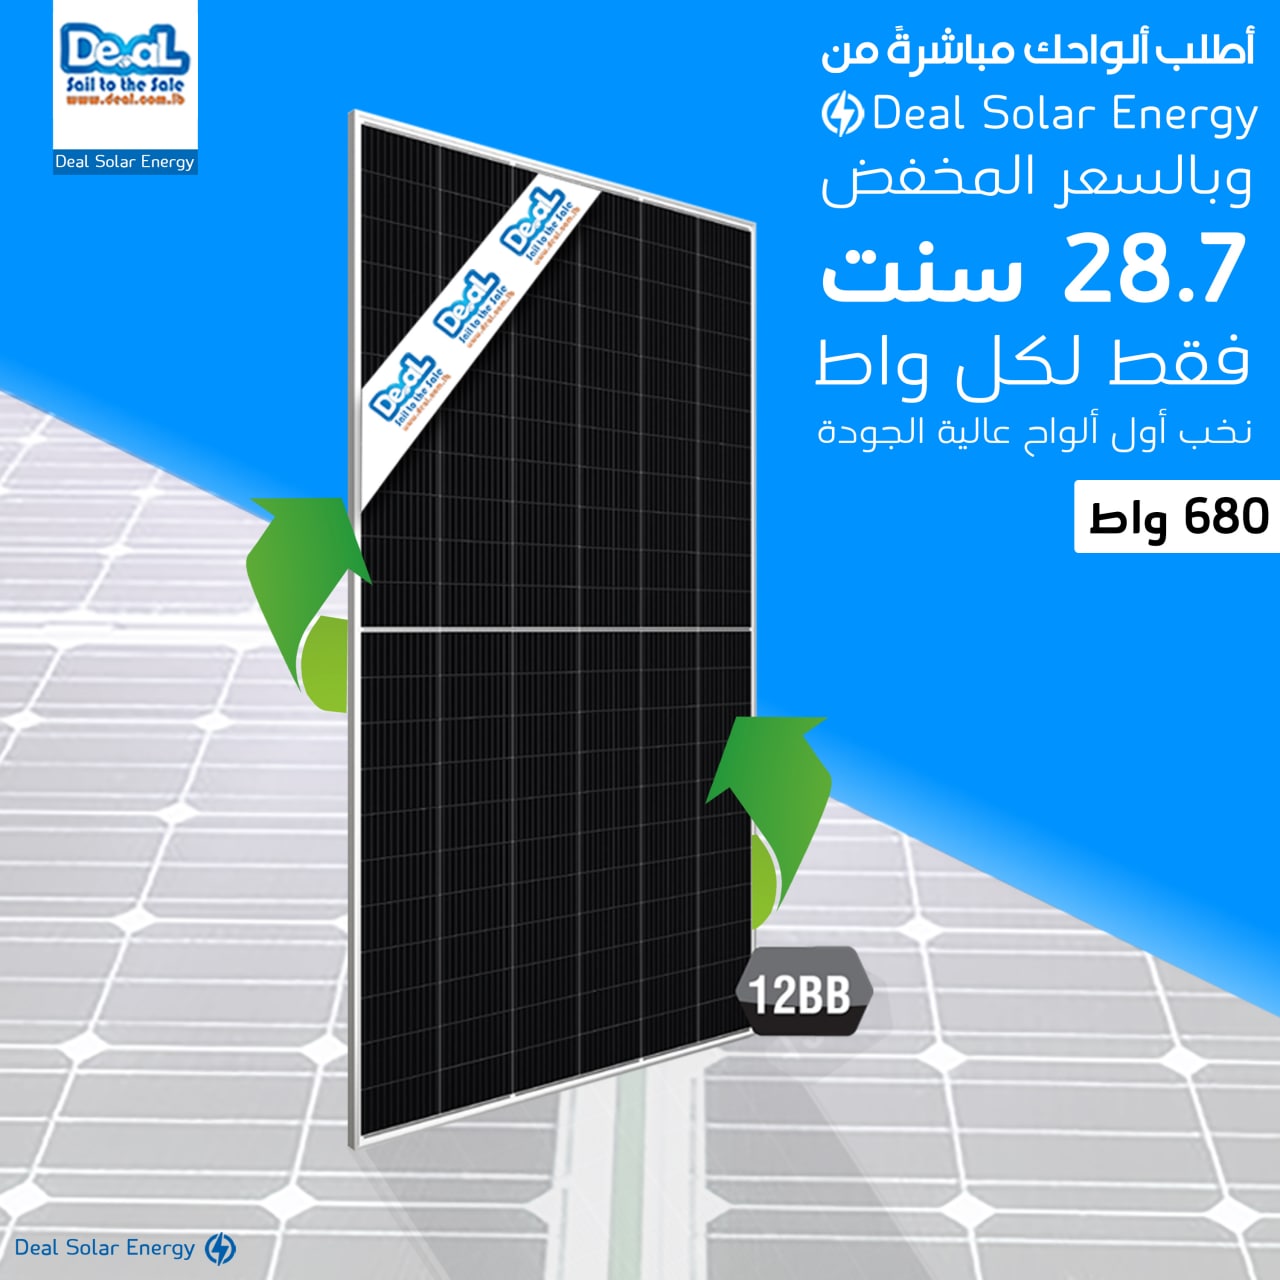 Deal Solar Energy High Efficiency Solar Panel ( Discounted Price ) 680 Watts